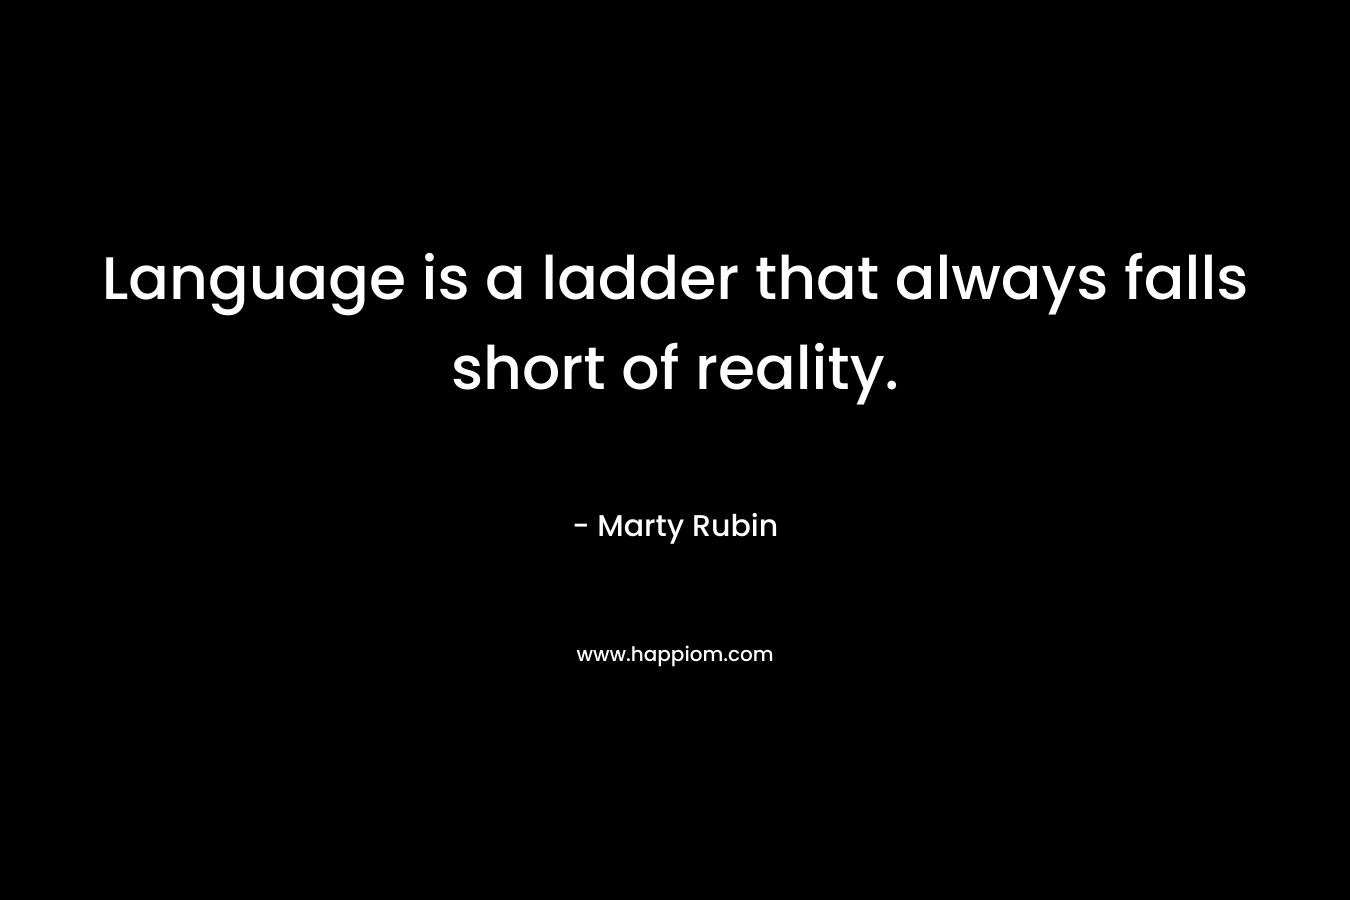 Language is a ladder that always falls short of reality.